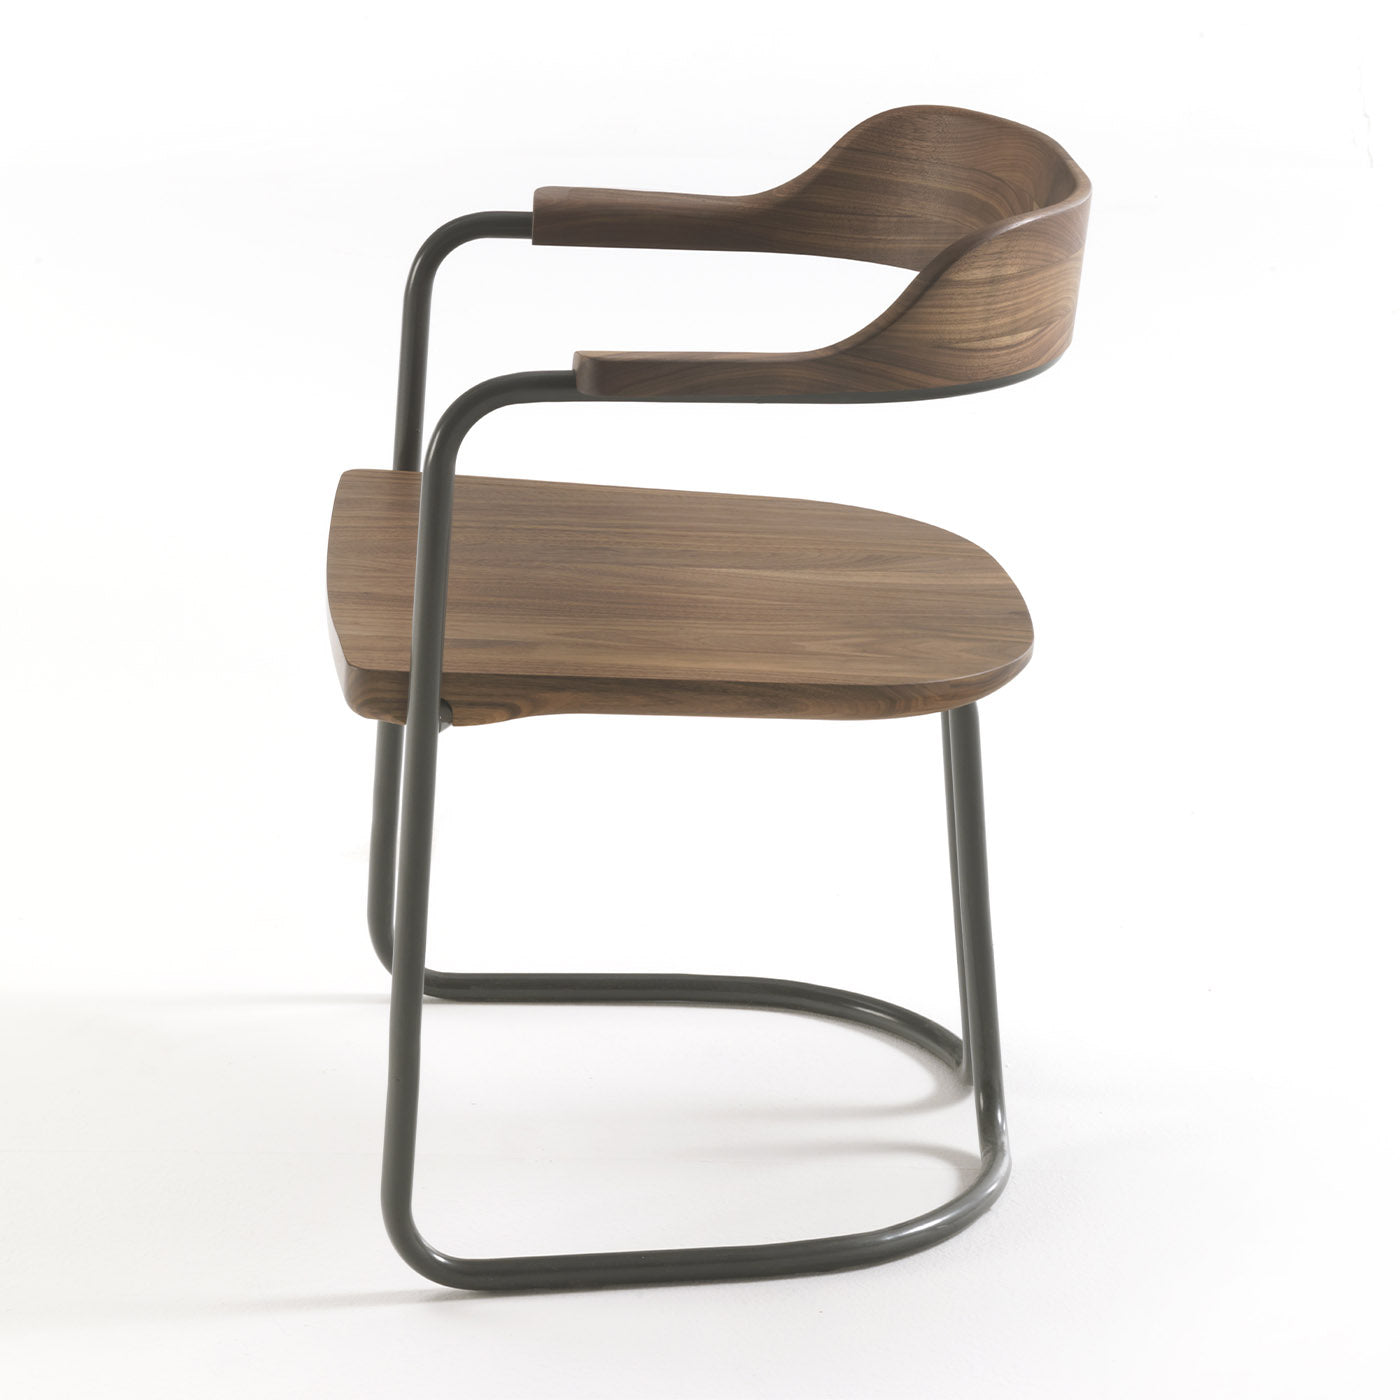 Tubular Anthracite-Gray Chair by Jamie Durie - Alternative view 3